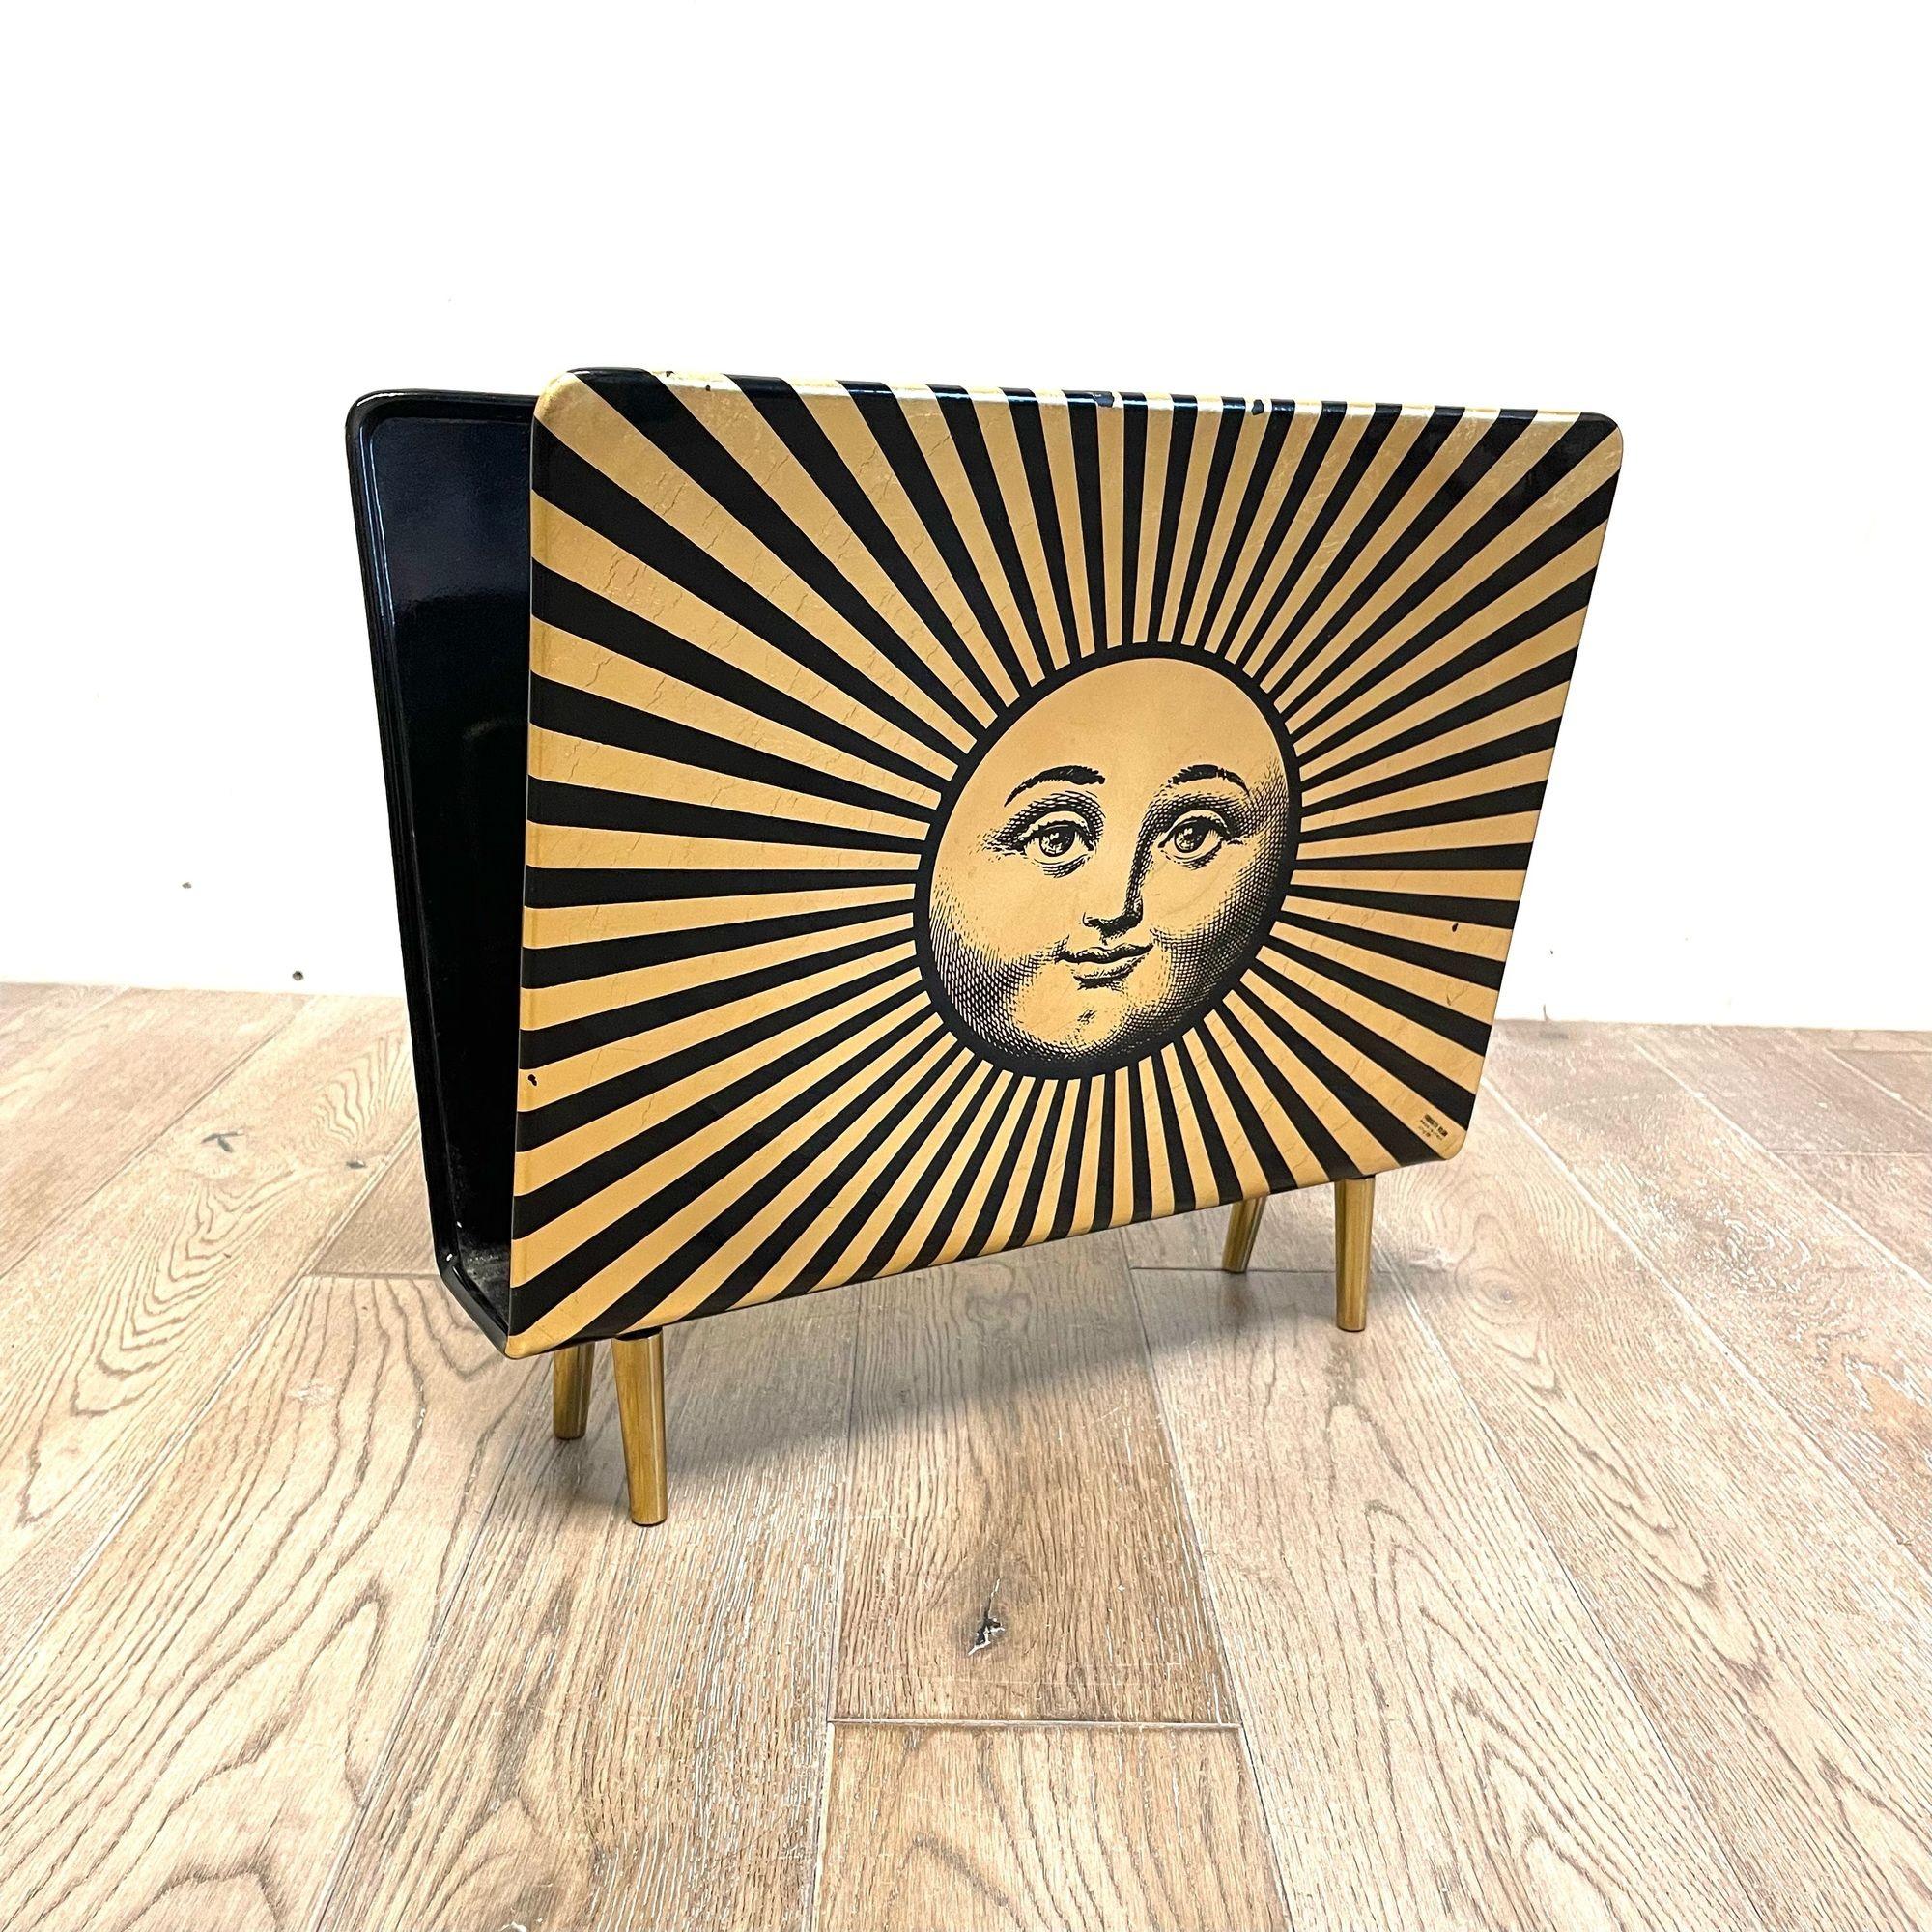 Piero Fornasetti, Mid Century Modern, Magazine Rack, Lacquer, Metal, Italy 1960s

A rare Piero Fornasetti labeled and numbered no. 1 of 98 having a lacquered metal and brass form. The decorative design depicting a sunbrust smiling face with black